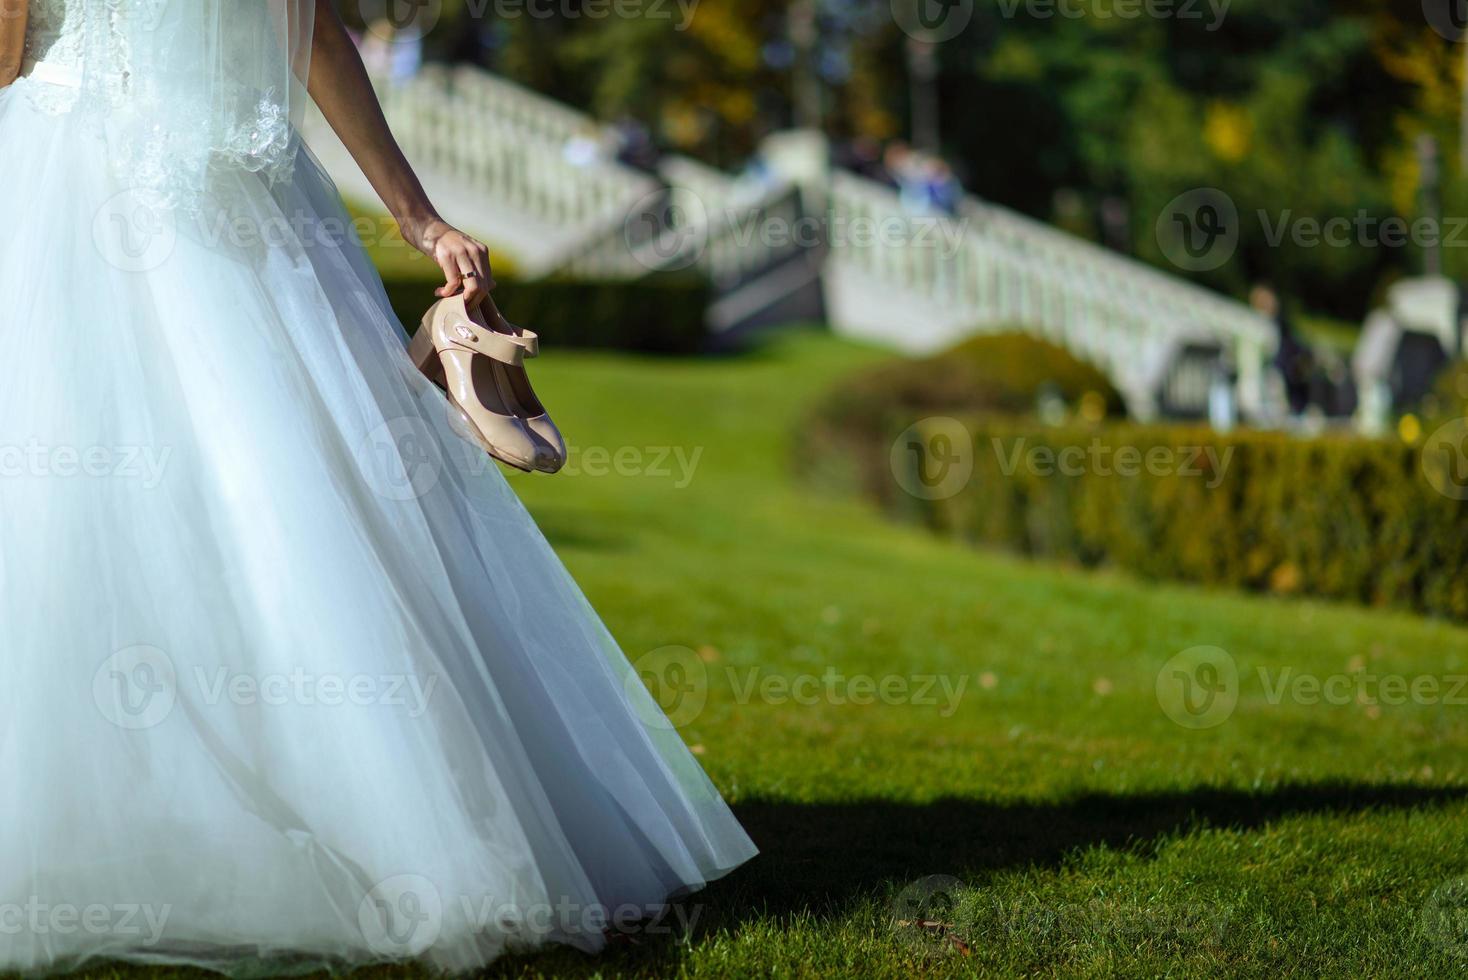 feet of bride and groom, wedding shoes photo